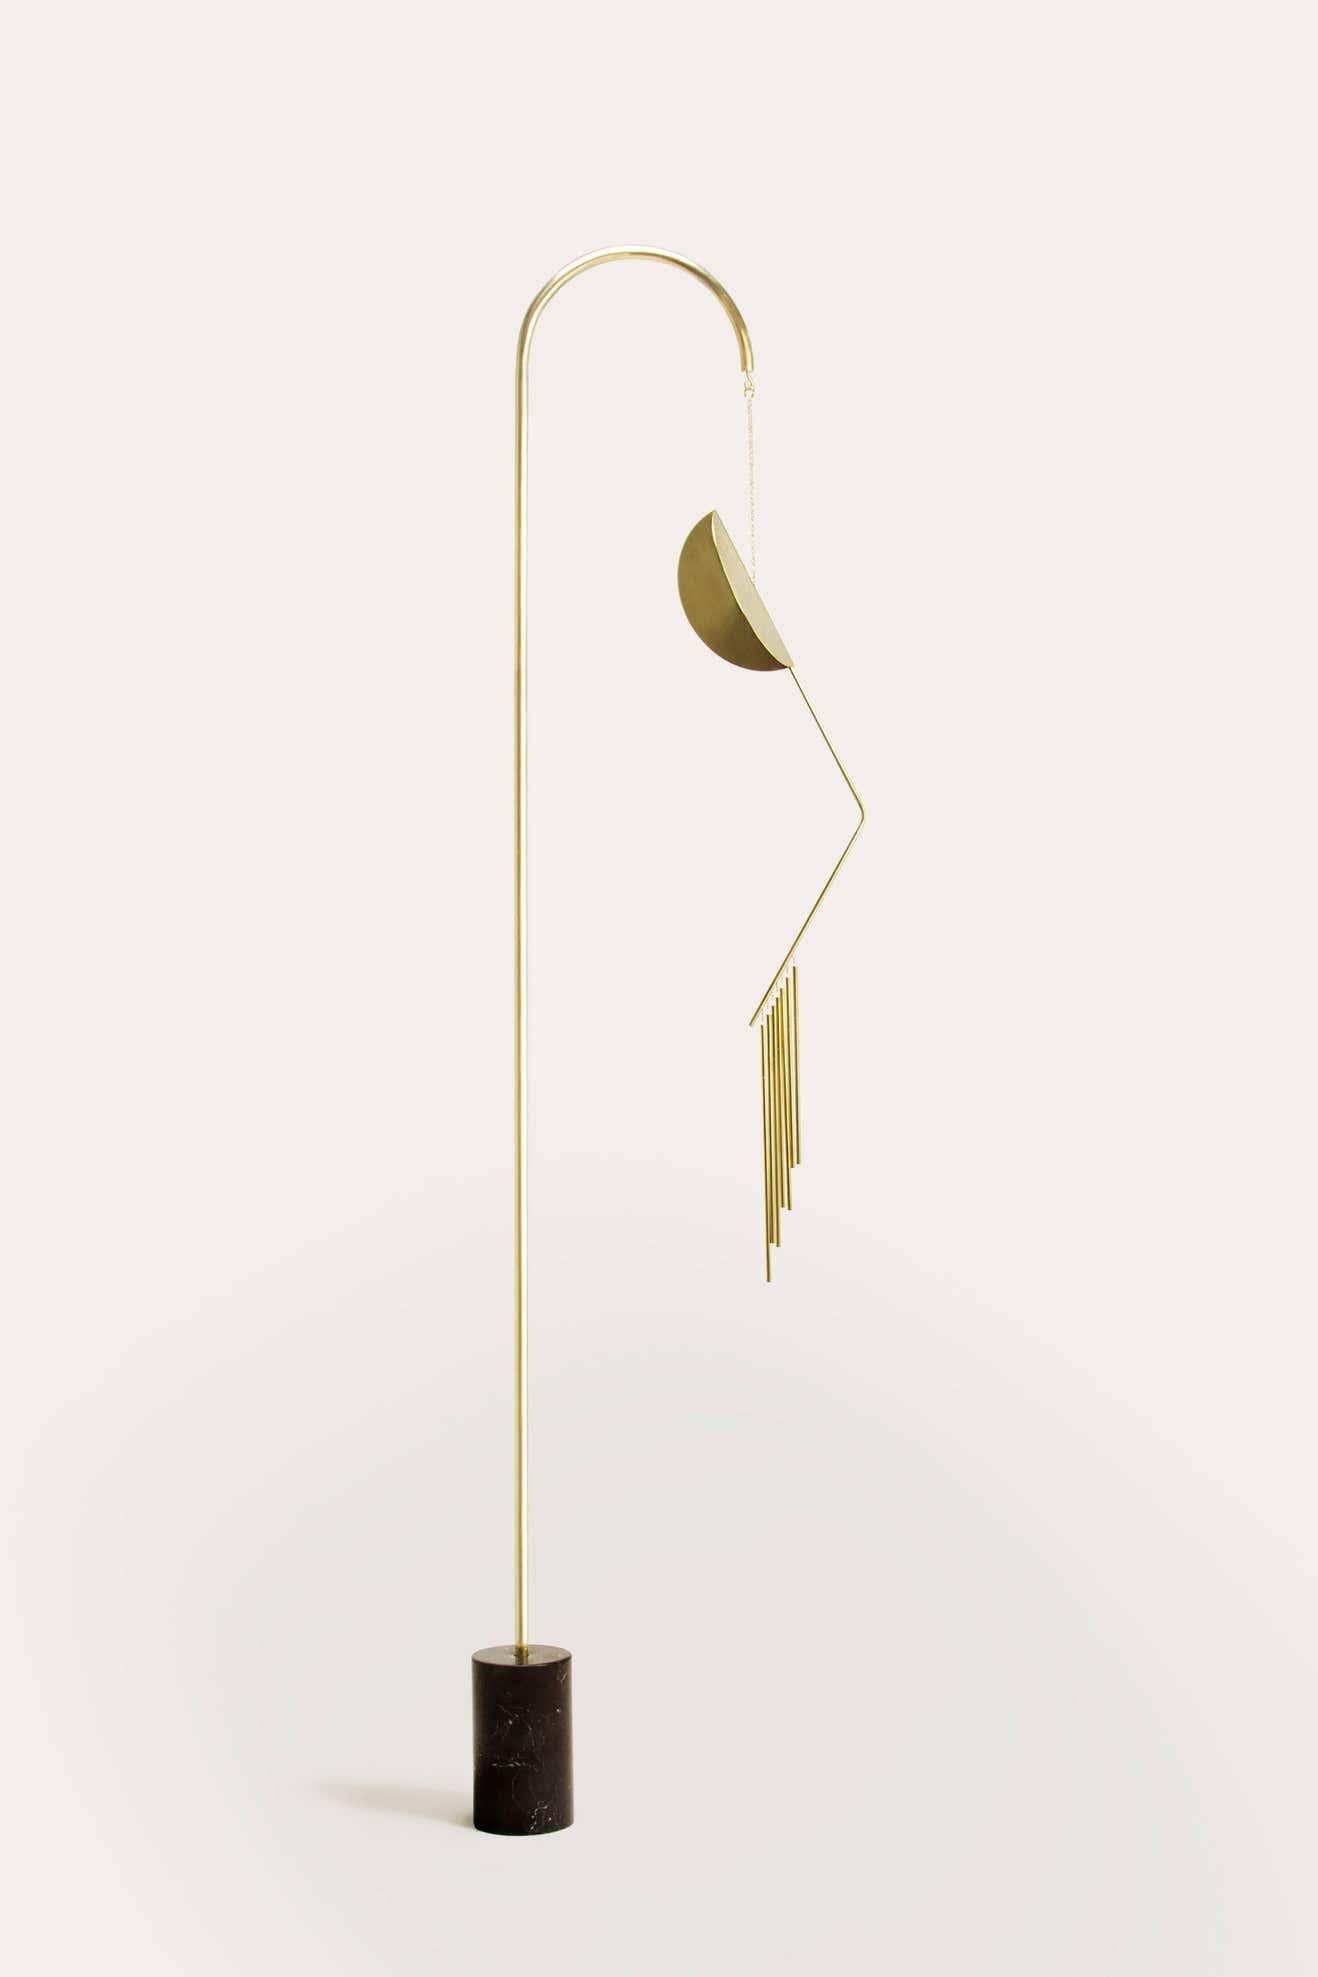 Agustina Bottoni - Melodicware — sound sculpture
2018
Sculpted by Agustina Bottoni
Hand-Sculpted in Italy
Materials: solid brass with satin fnish -
base in black Marquina or white Carrara marble
Dimensions: 185 cm x 50 cm / 73’’ x